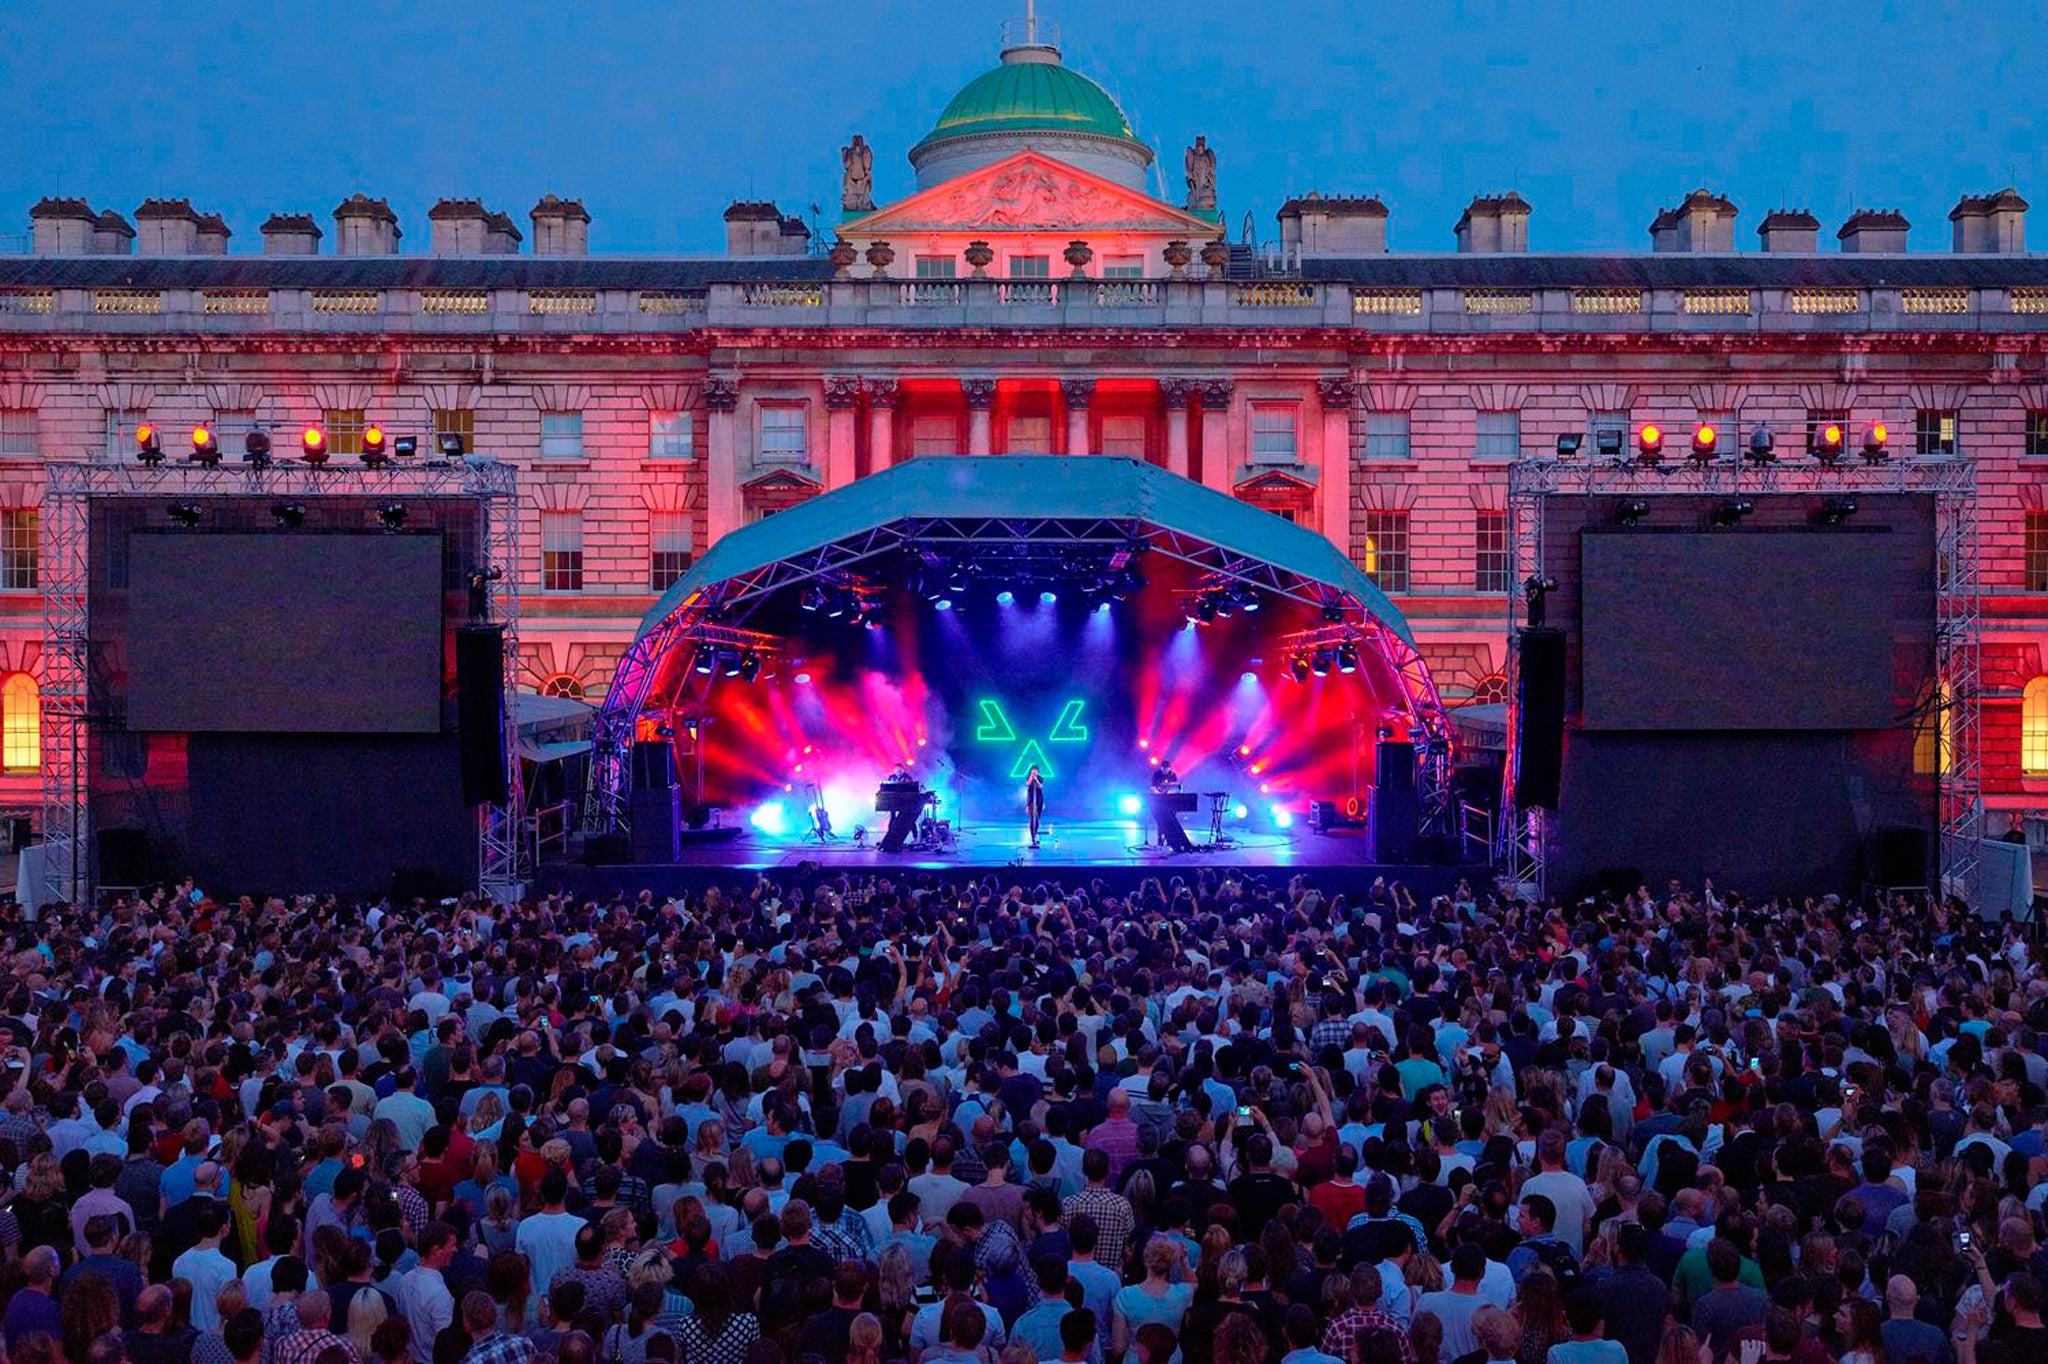 The Somerset House Summer Series gigs return for another year